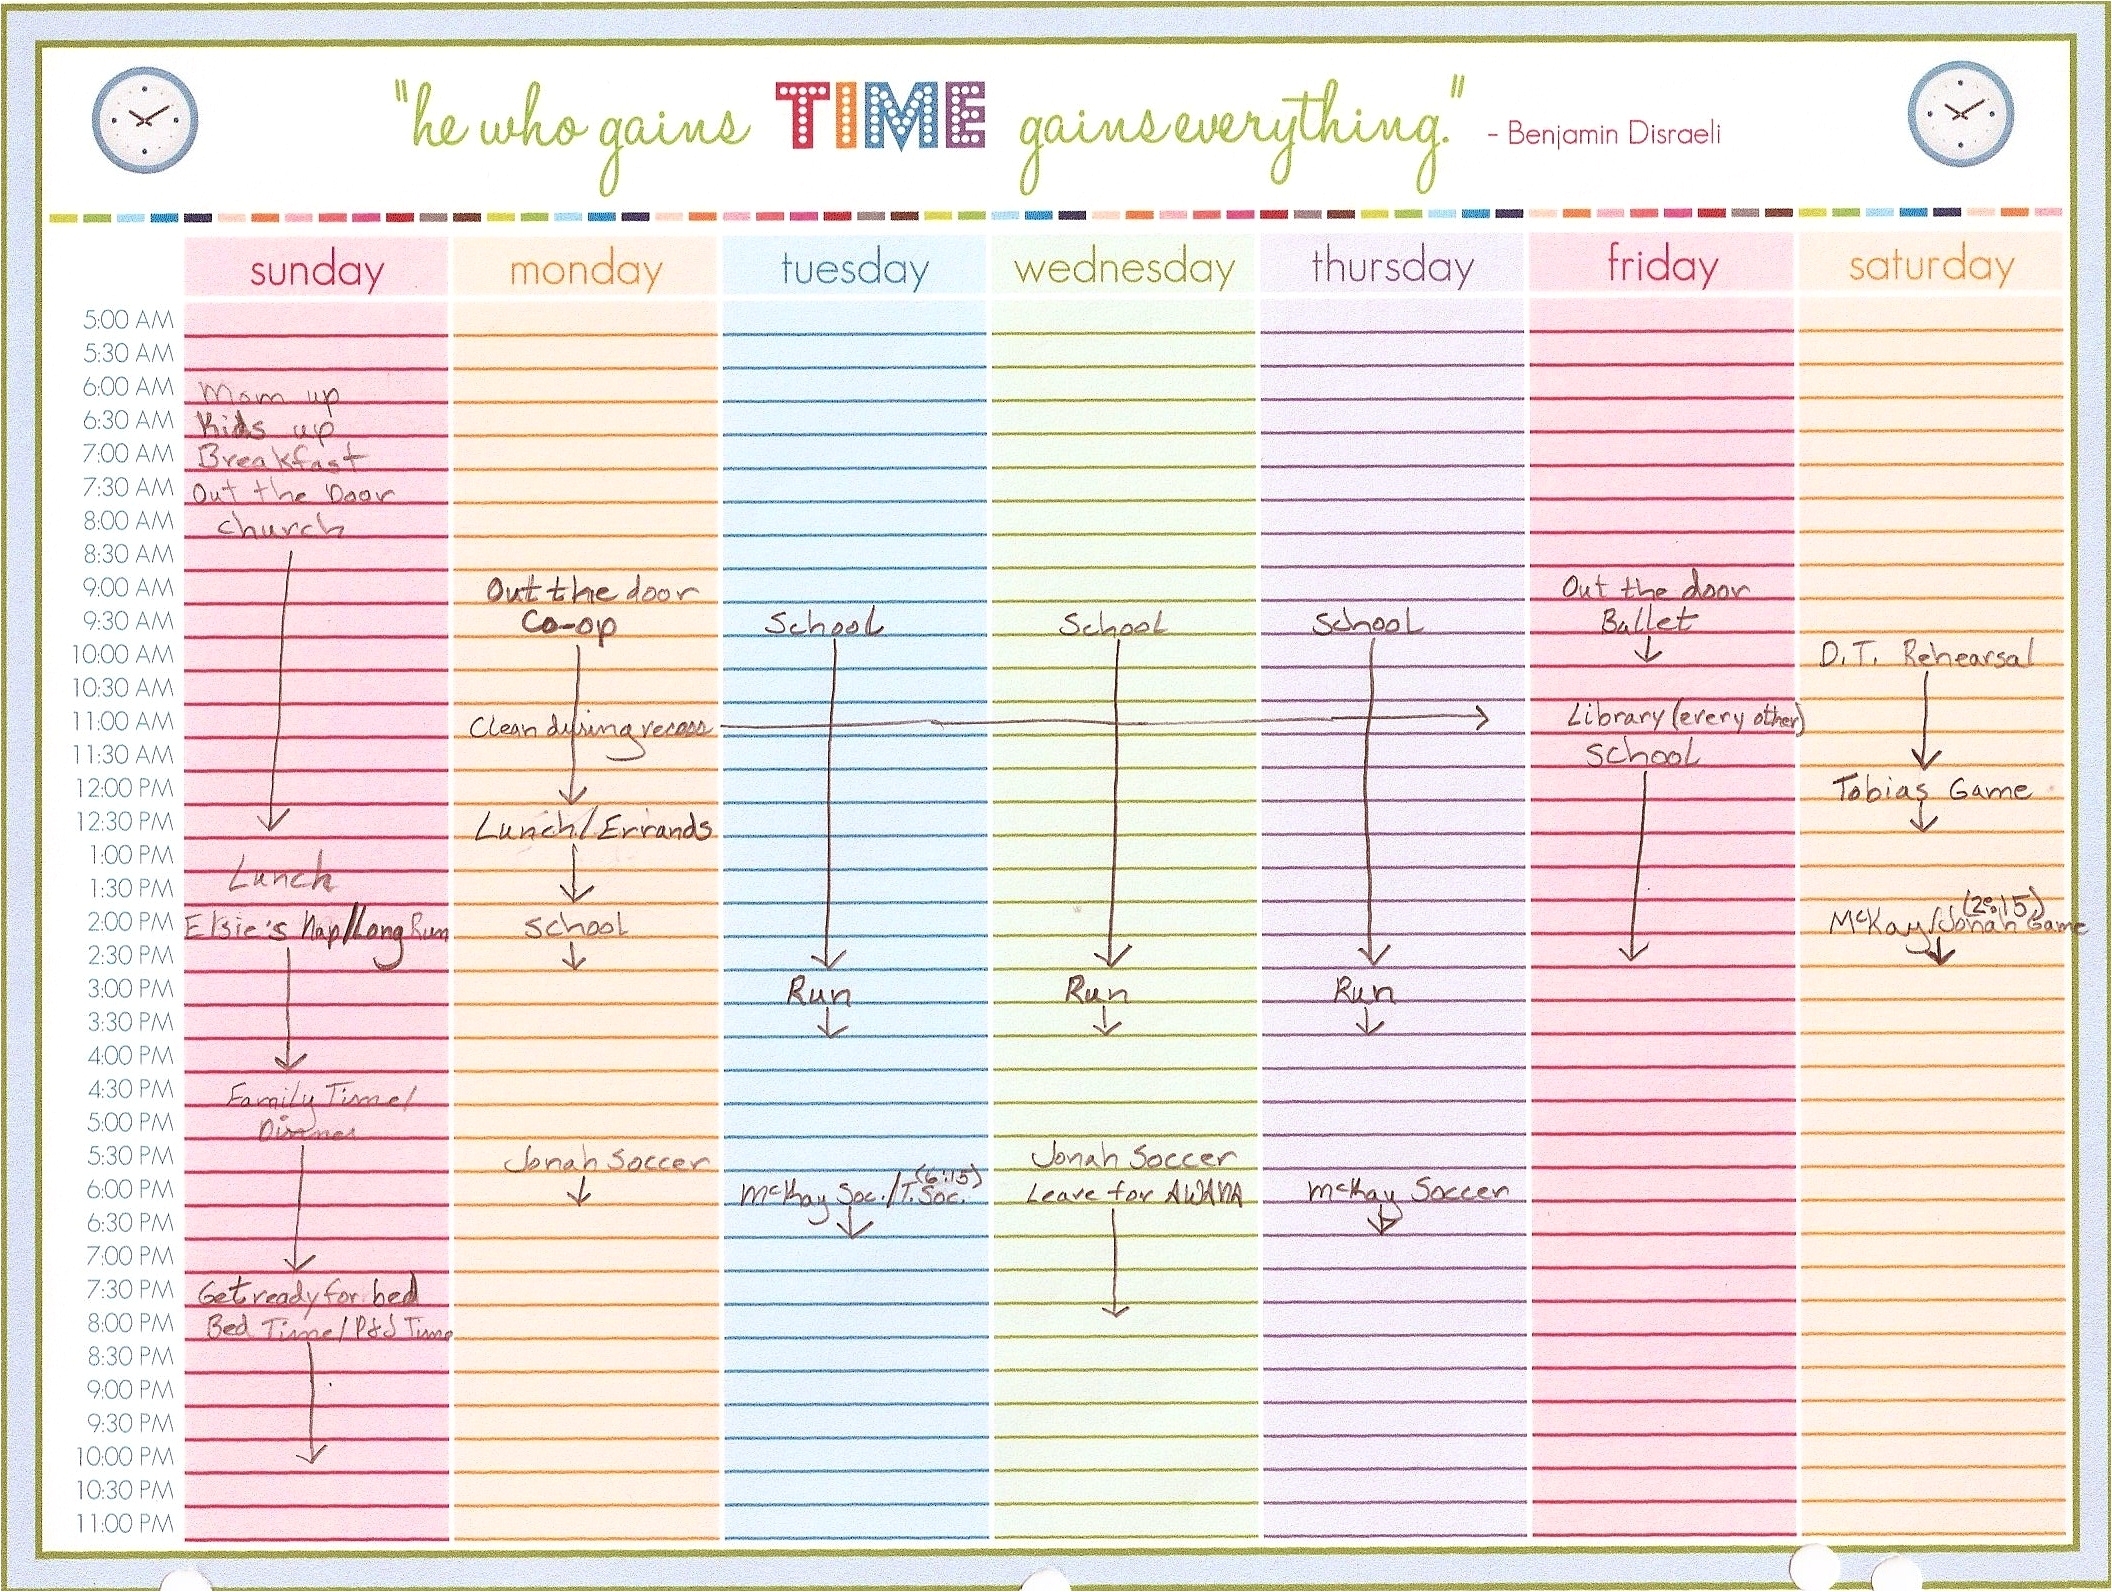 Free Weekly Calendar Weekly Calendar With Time Slots Template Weekly within Calendar Weekly With Time Slots